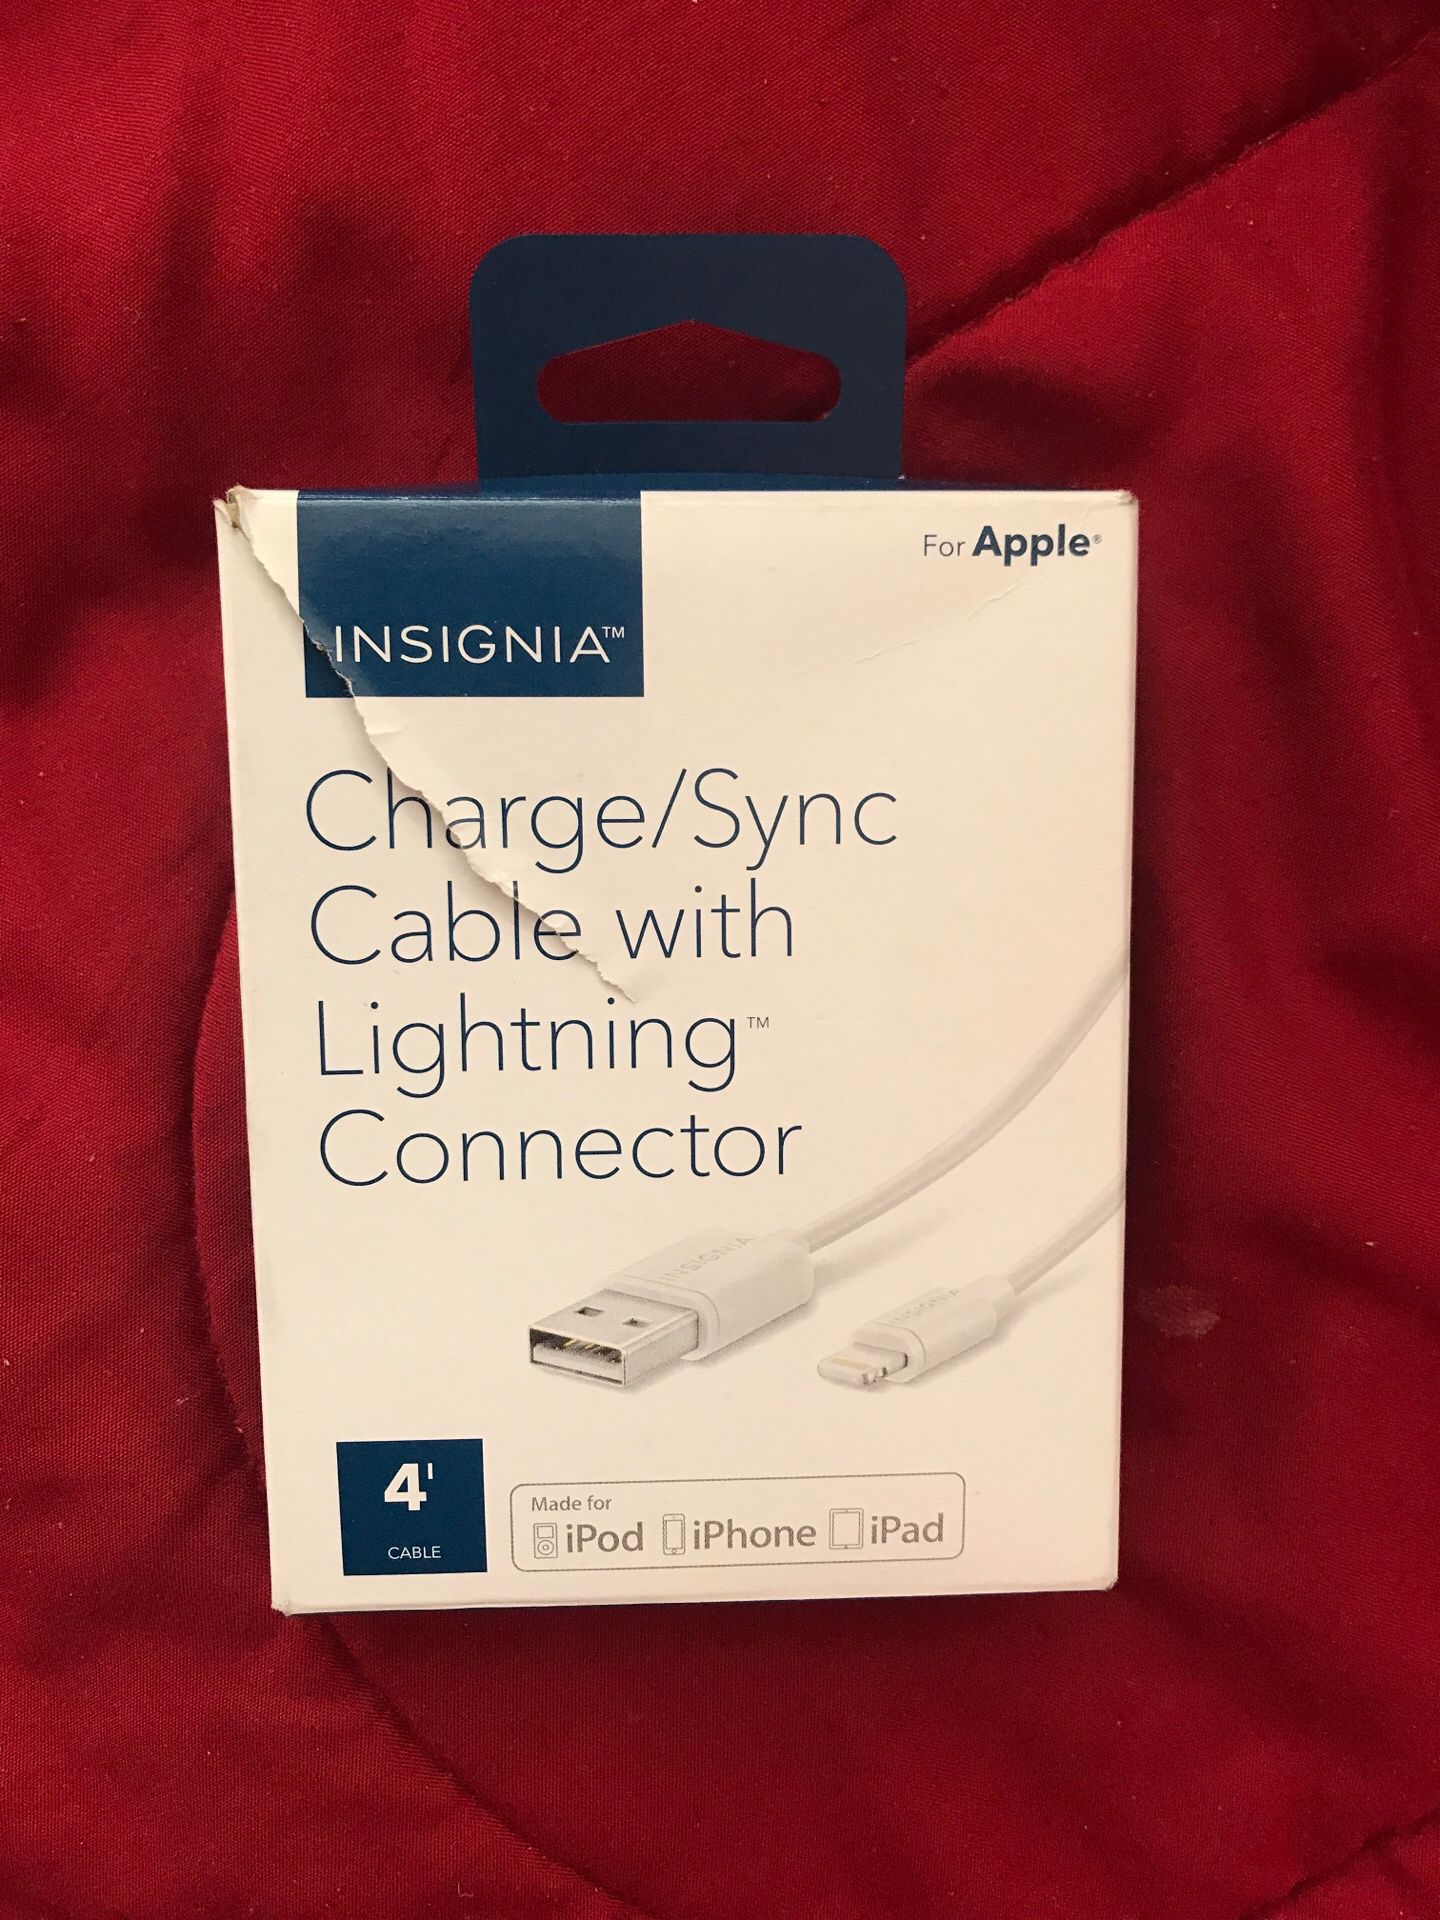 Insignia Charge/Synch Cable with Lightning Connector.